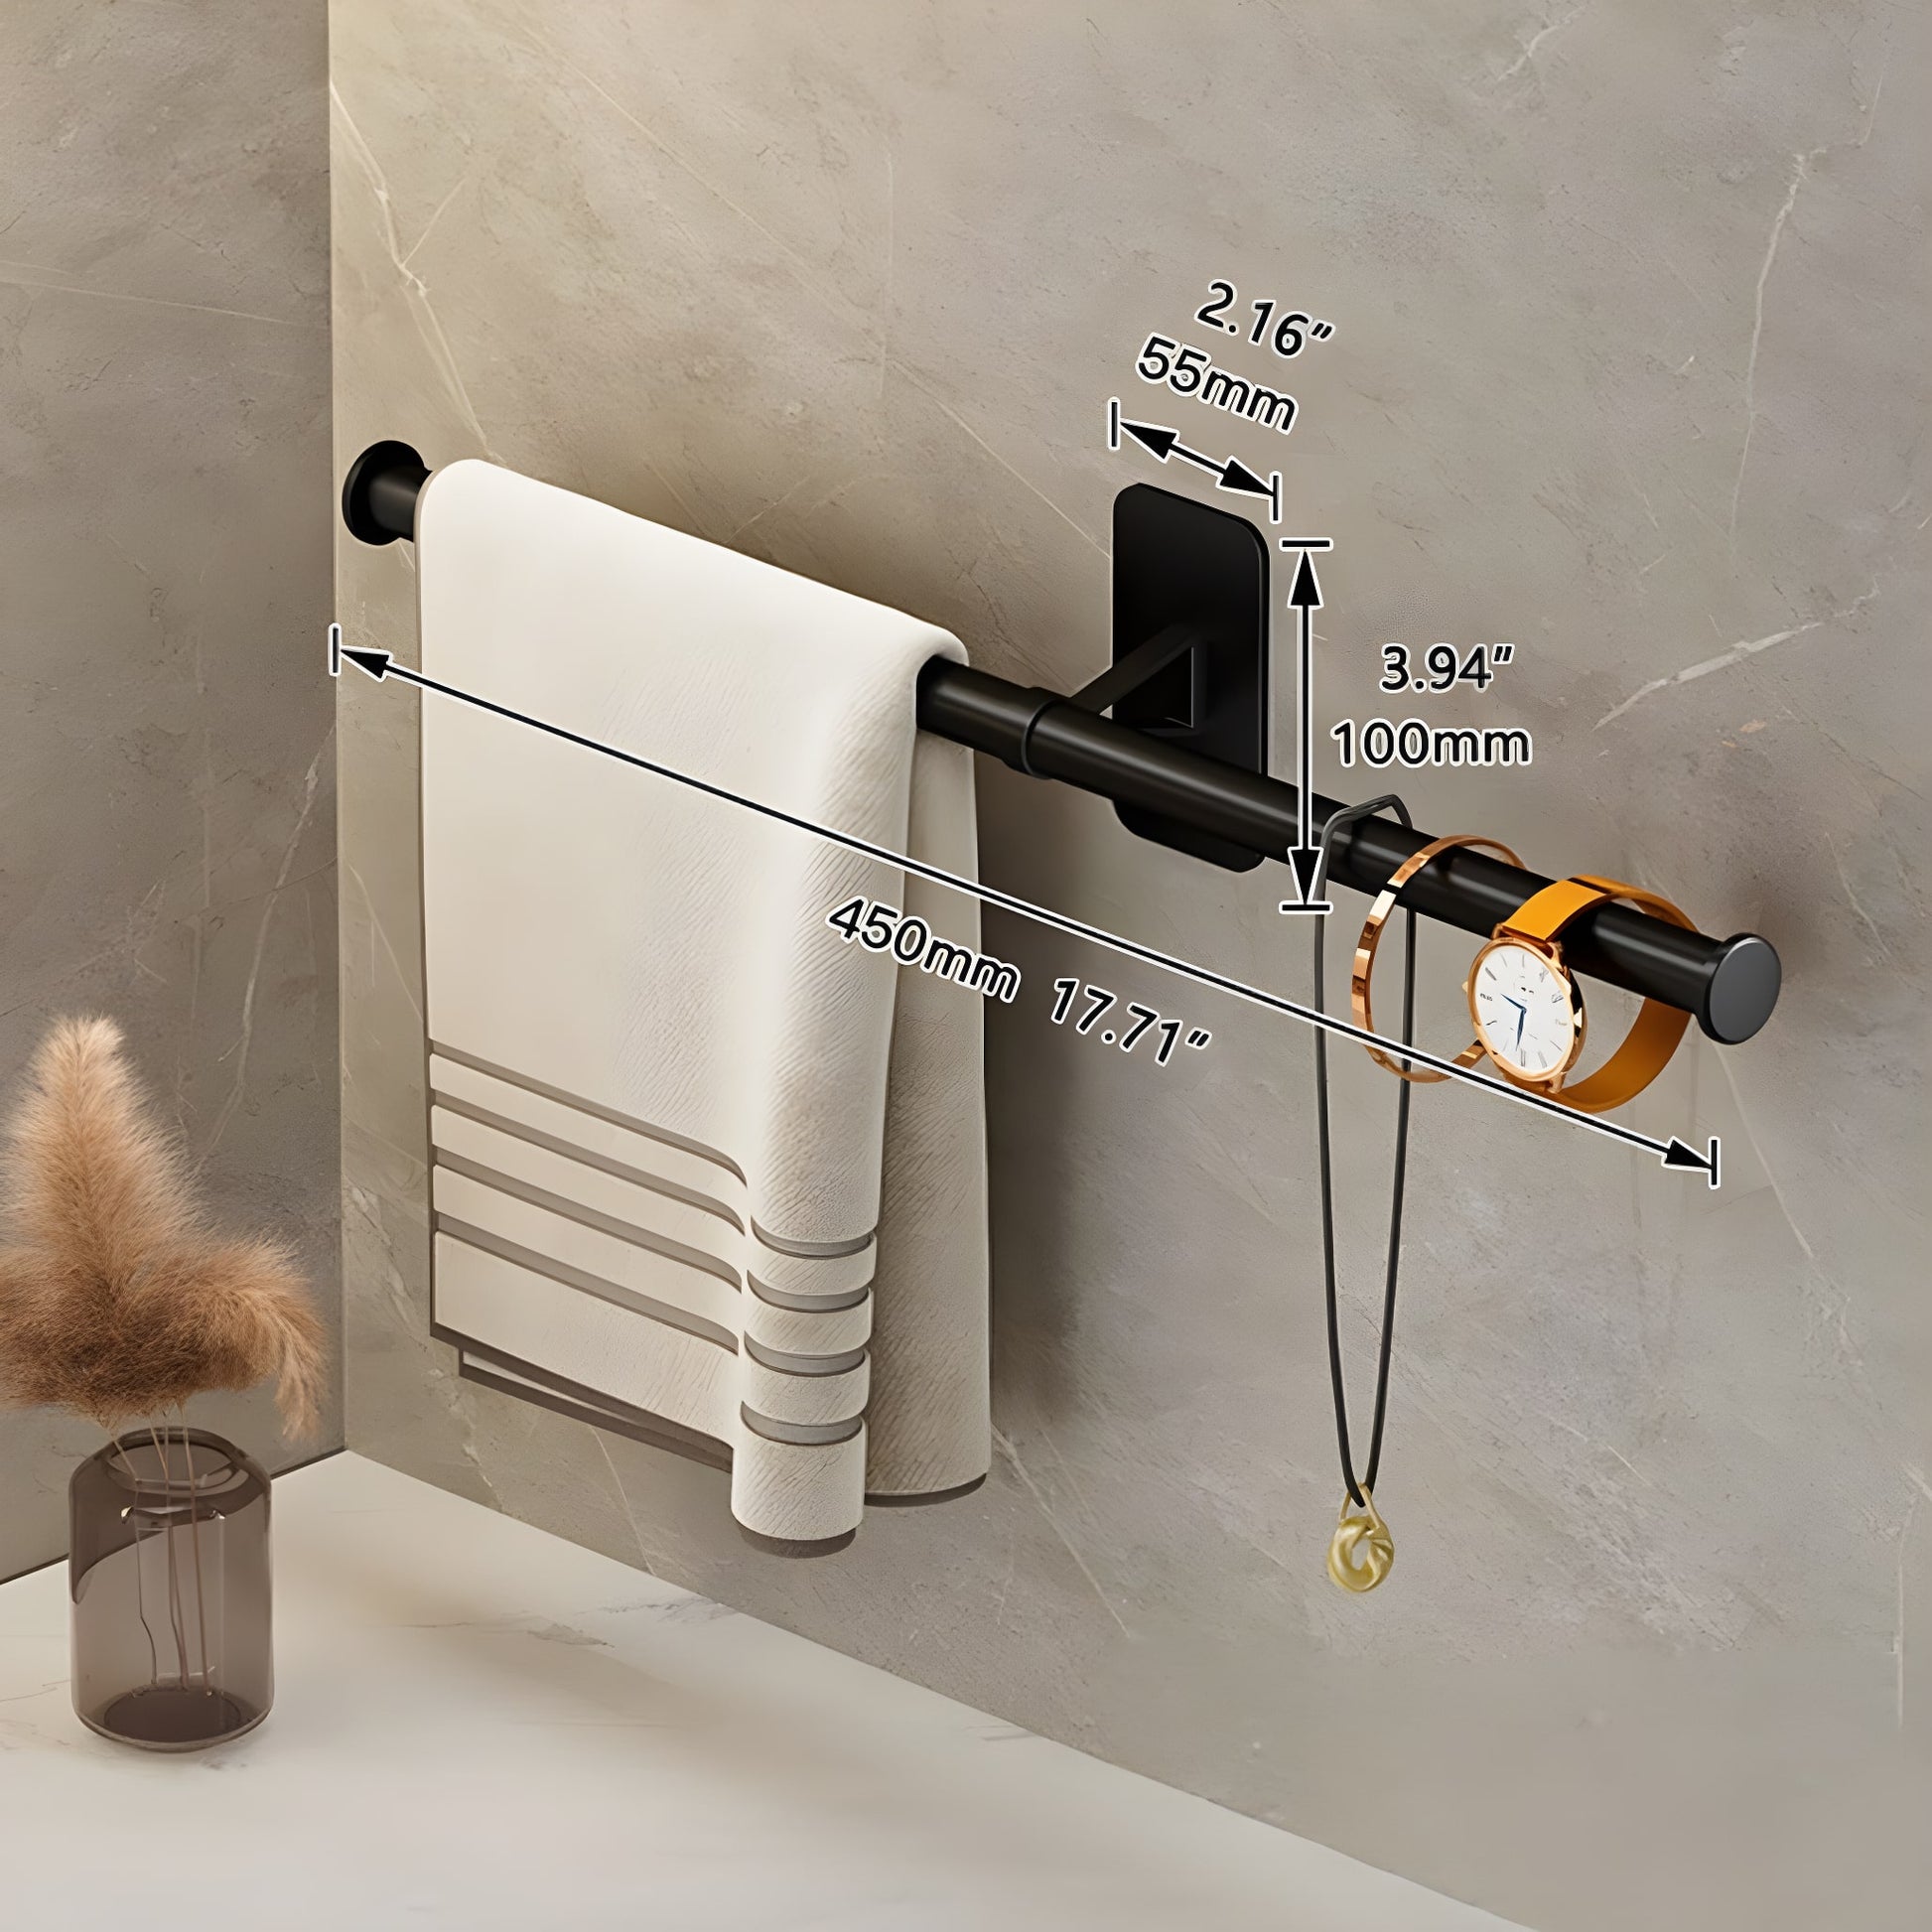 Bath towel holders for wall mounting